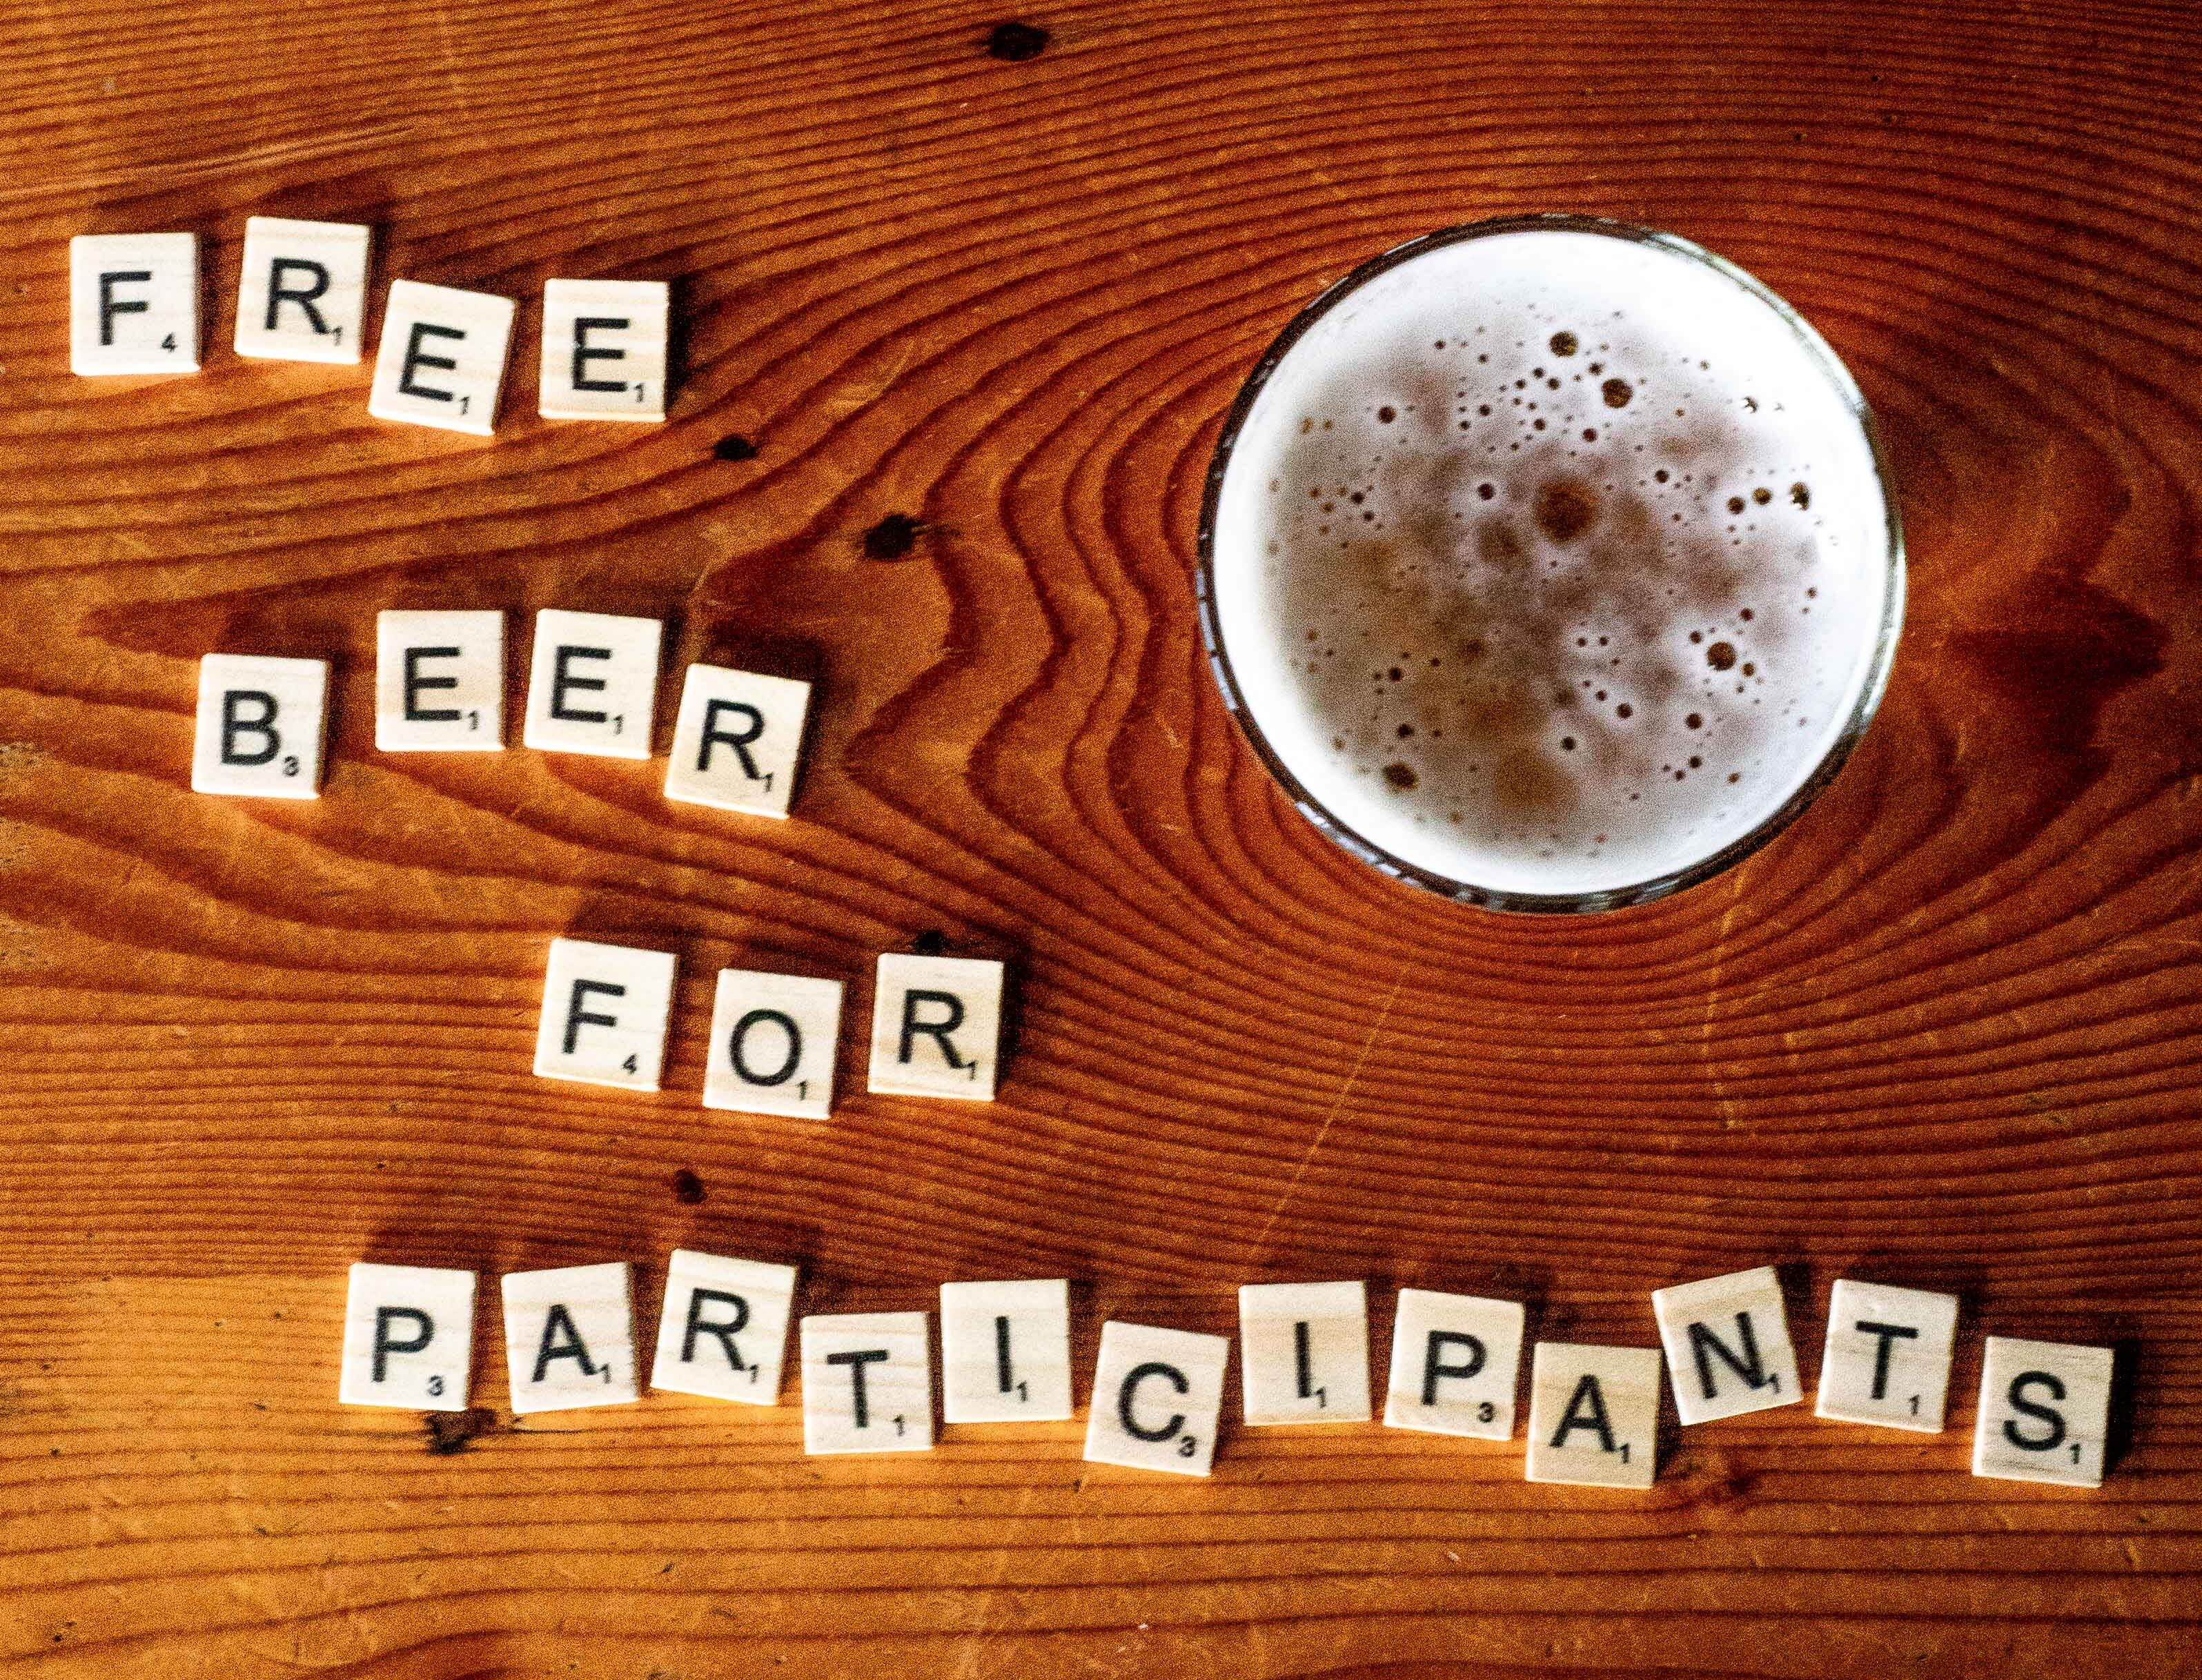 'FREE BEER FOR PARTICIPANTS' spelled out in Scrabble letters next to a pint of Draught Works beer.